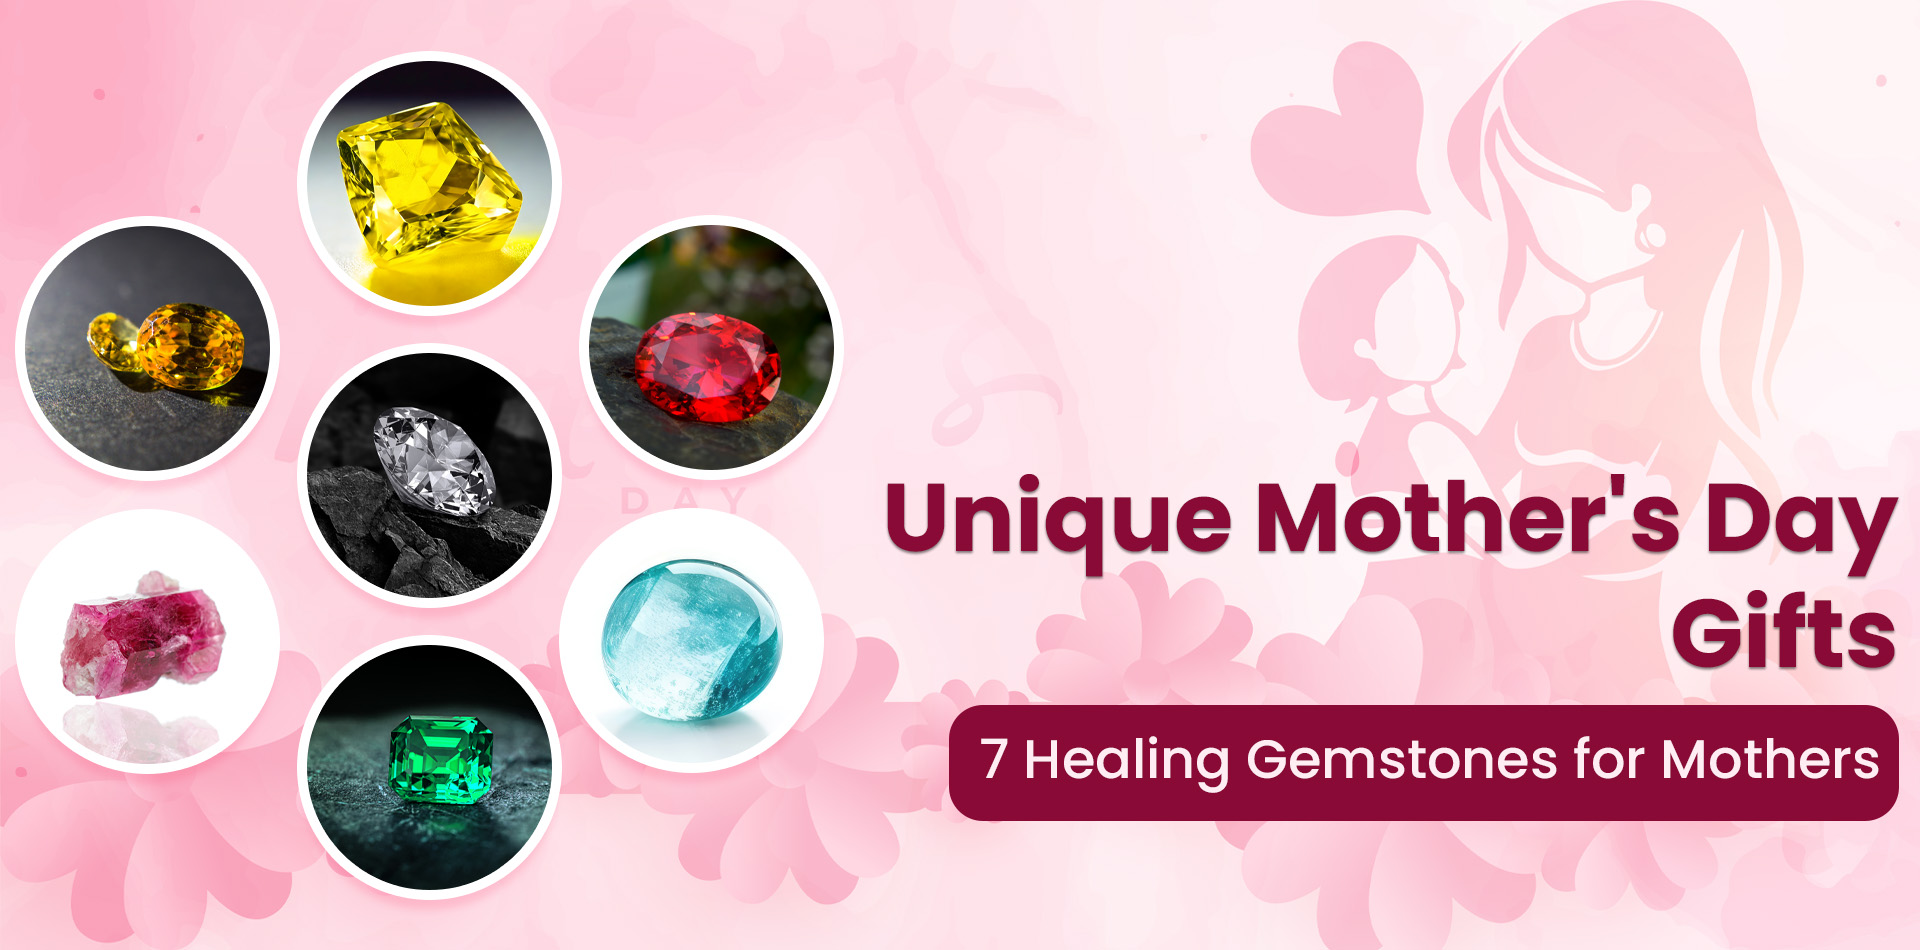 Unique Mother's Day Gifts: 7 Healing Gemstones for Mothers